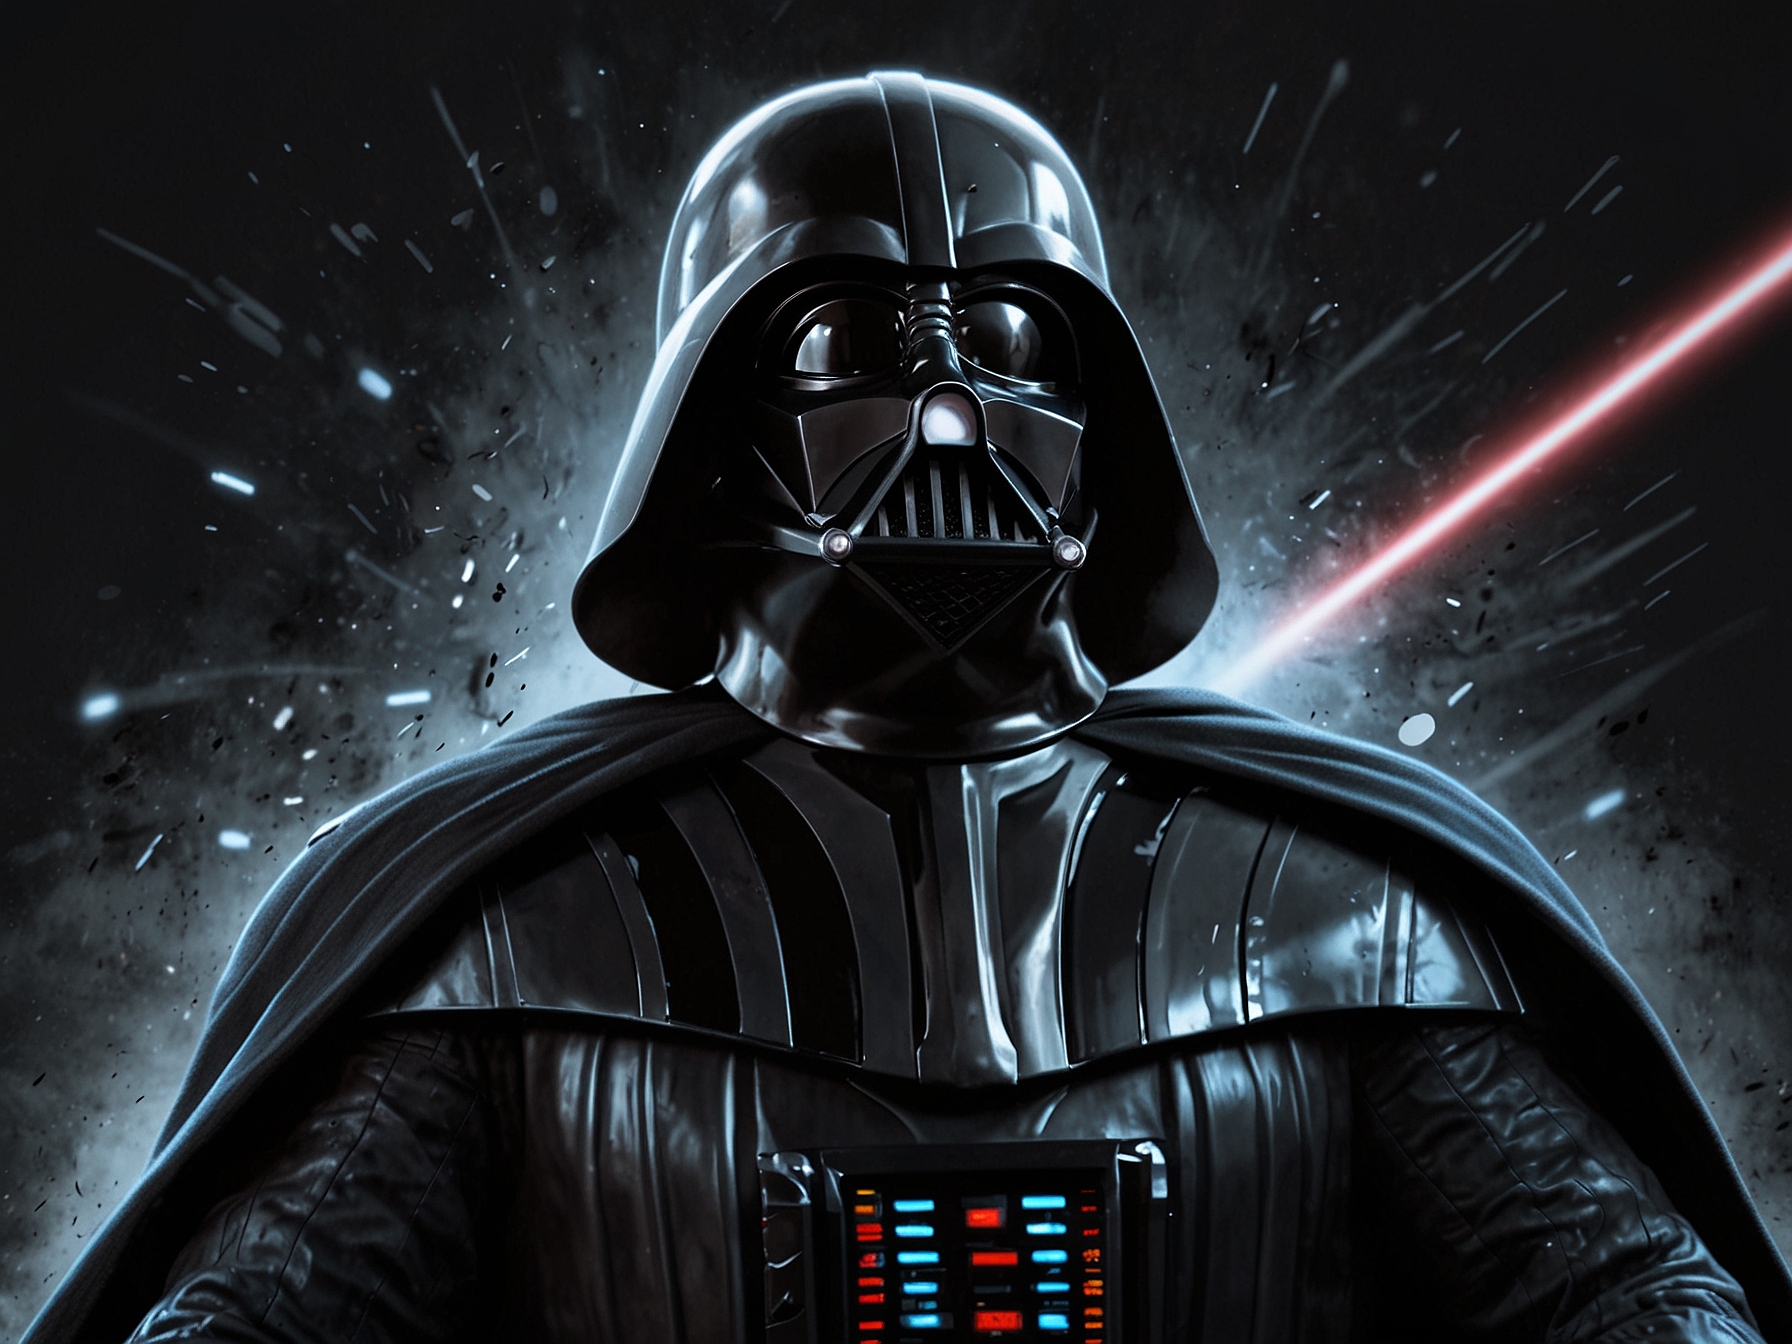 An illustration of Darth Vader, showcasing his relentless quest for power and personal reconciliation, depicting his struggles and internal conflicts post-Empire Strikes Back.